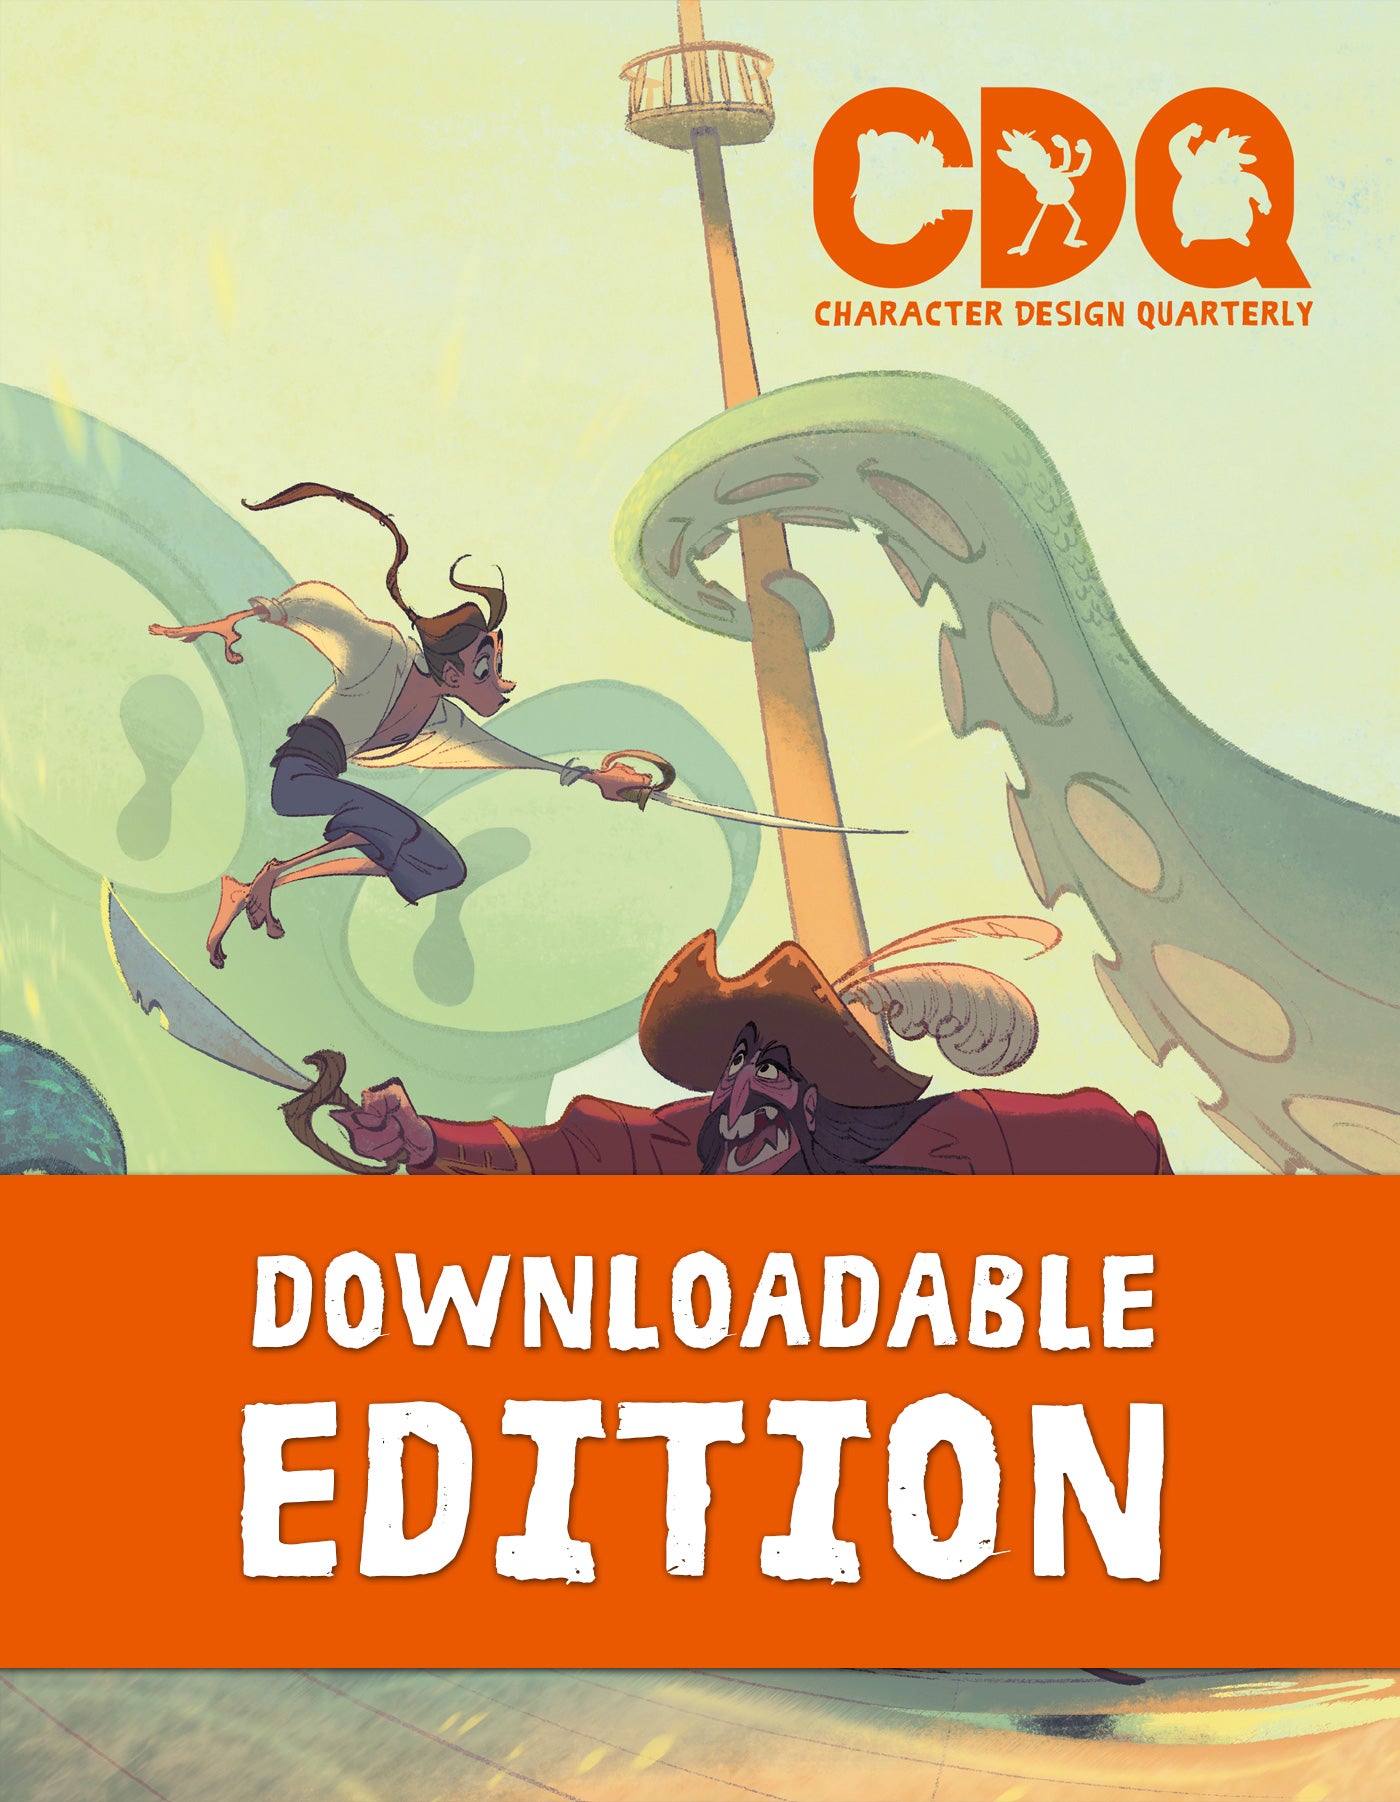 Character Design Quarterly cover of an illustration of pirates fighting on a ship, with a giant tentacle monster in the background